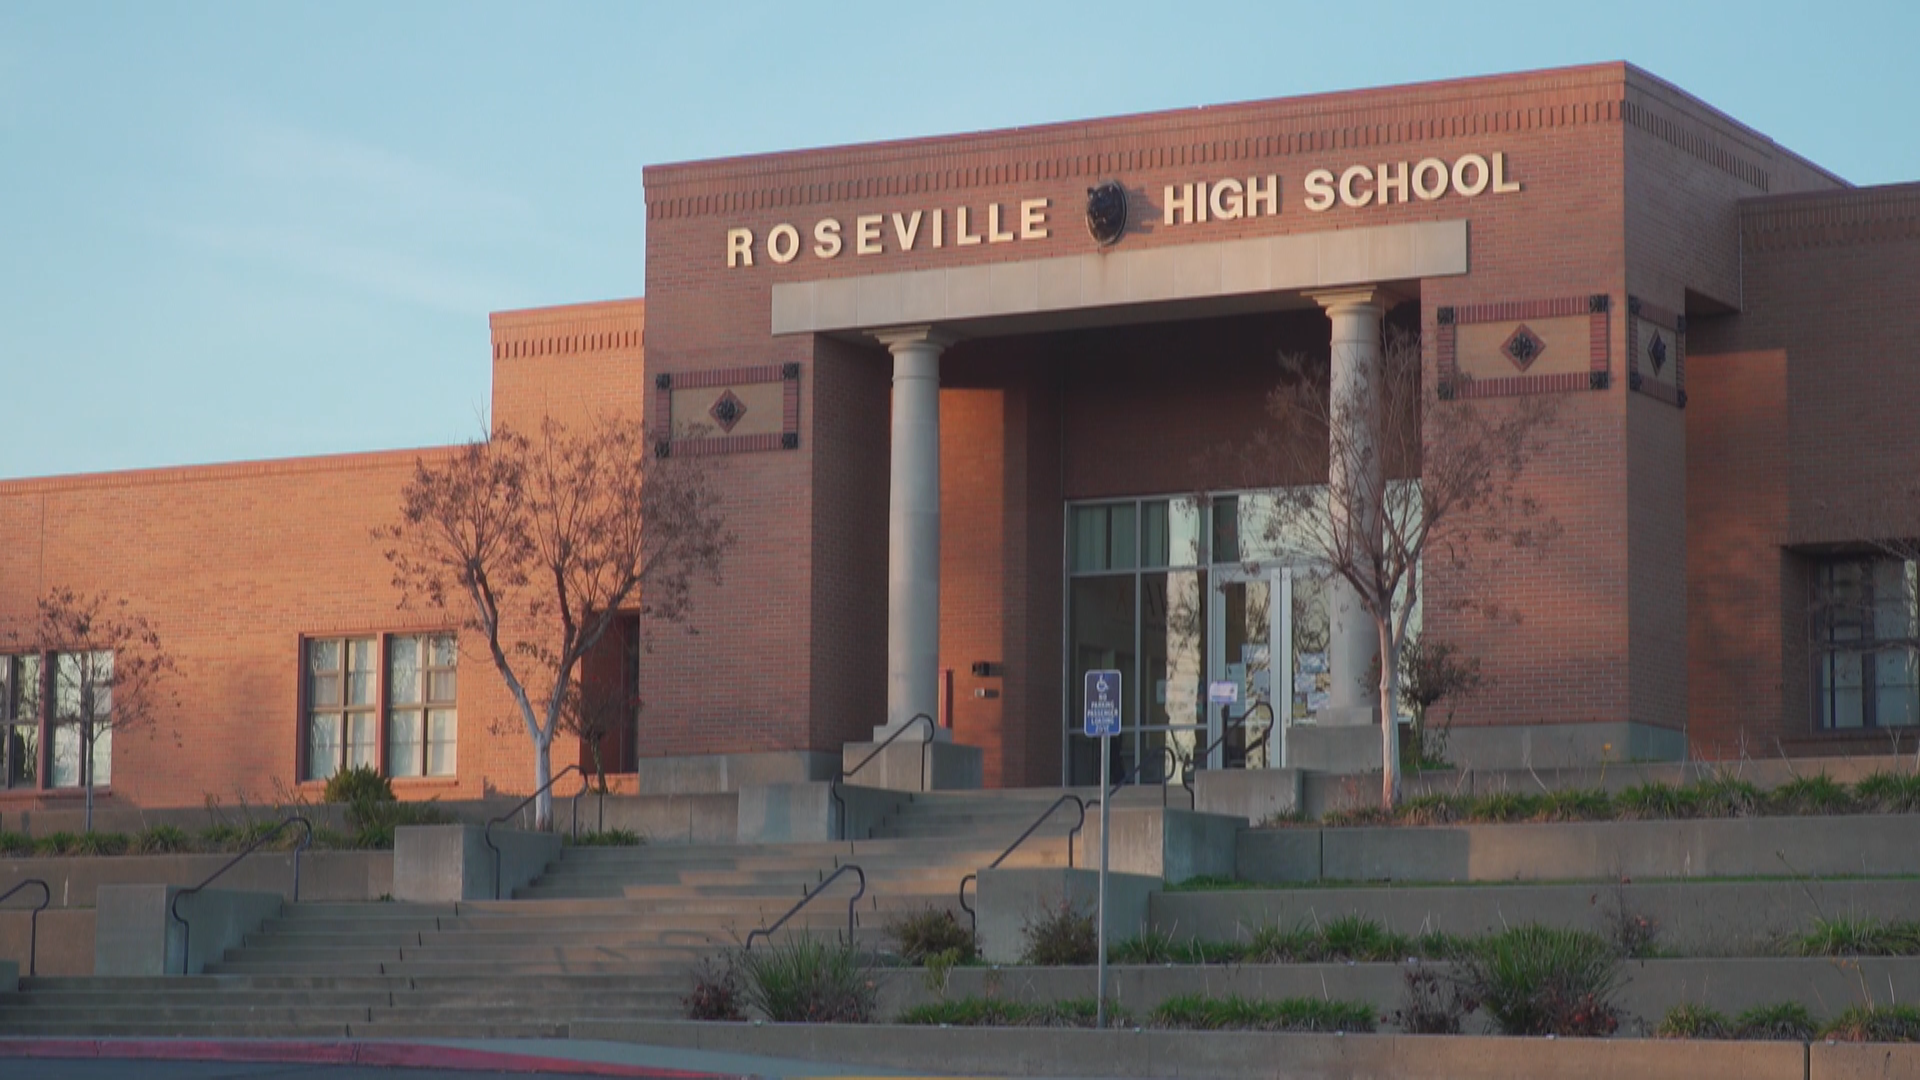 Roseville High School is returning to distant learning after the district sent a letter to parents that 18 teachers tested positive for COVID-19.